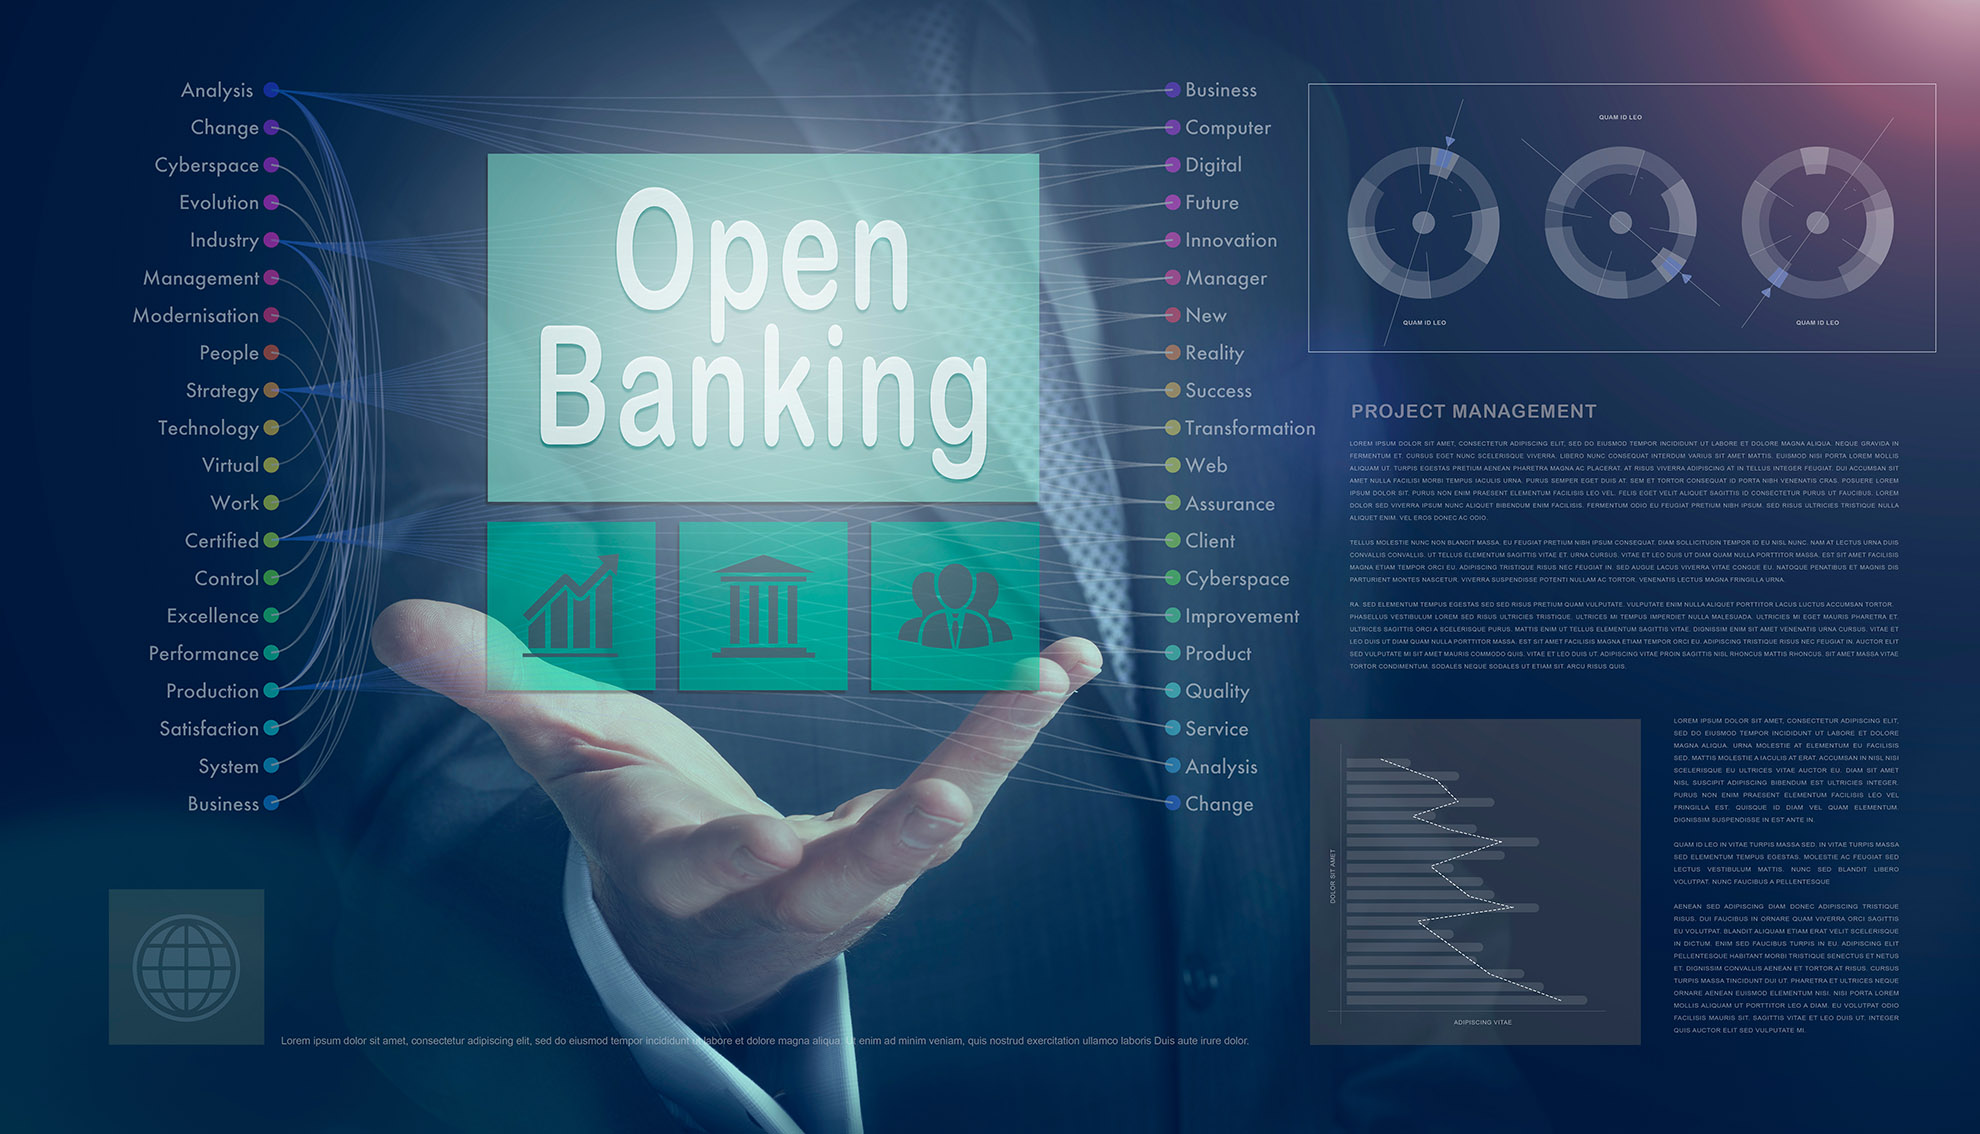 How does each open banking platform help prevent data theft or leaks?